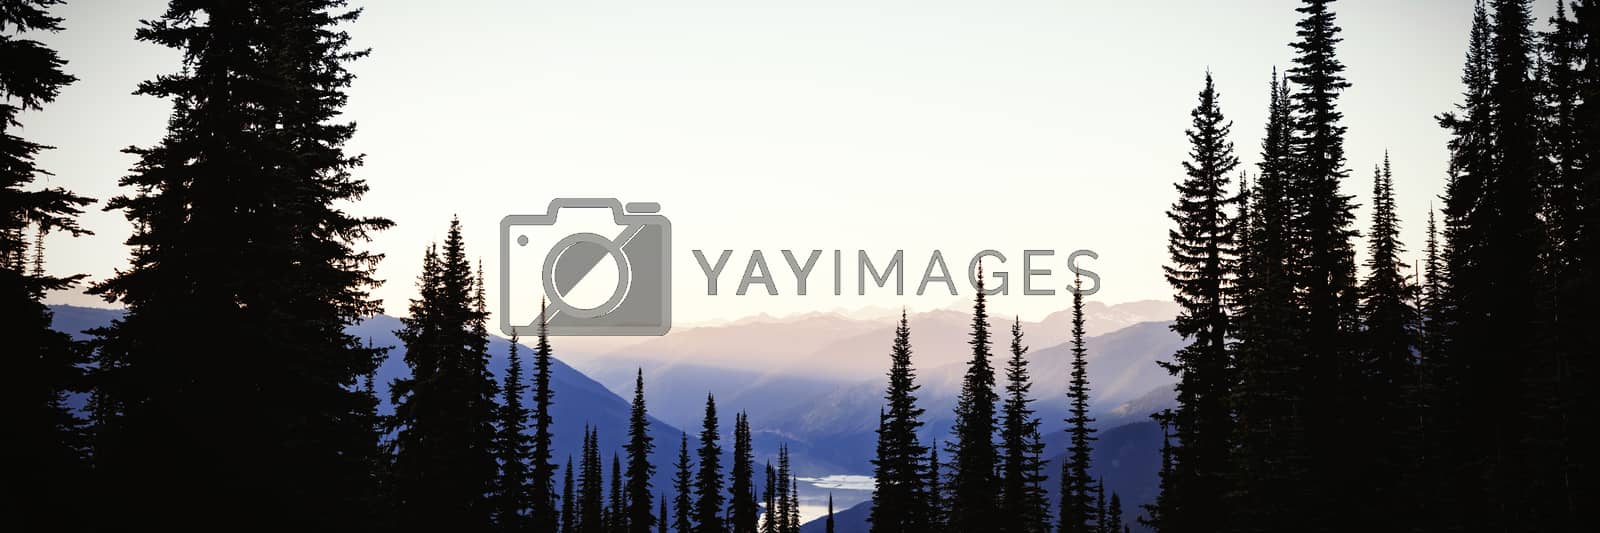 Royalty free image of Coniferous tree covered over a mountain by Wavebreakmedia